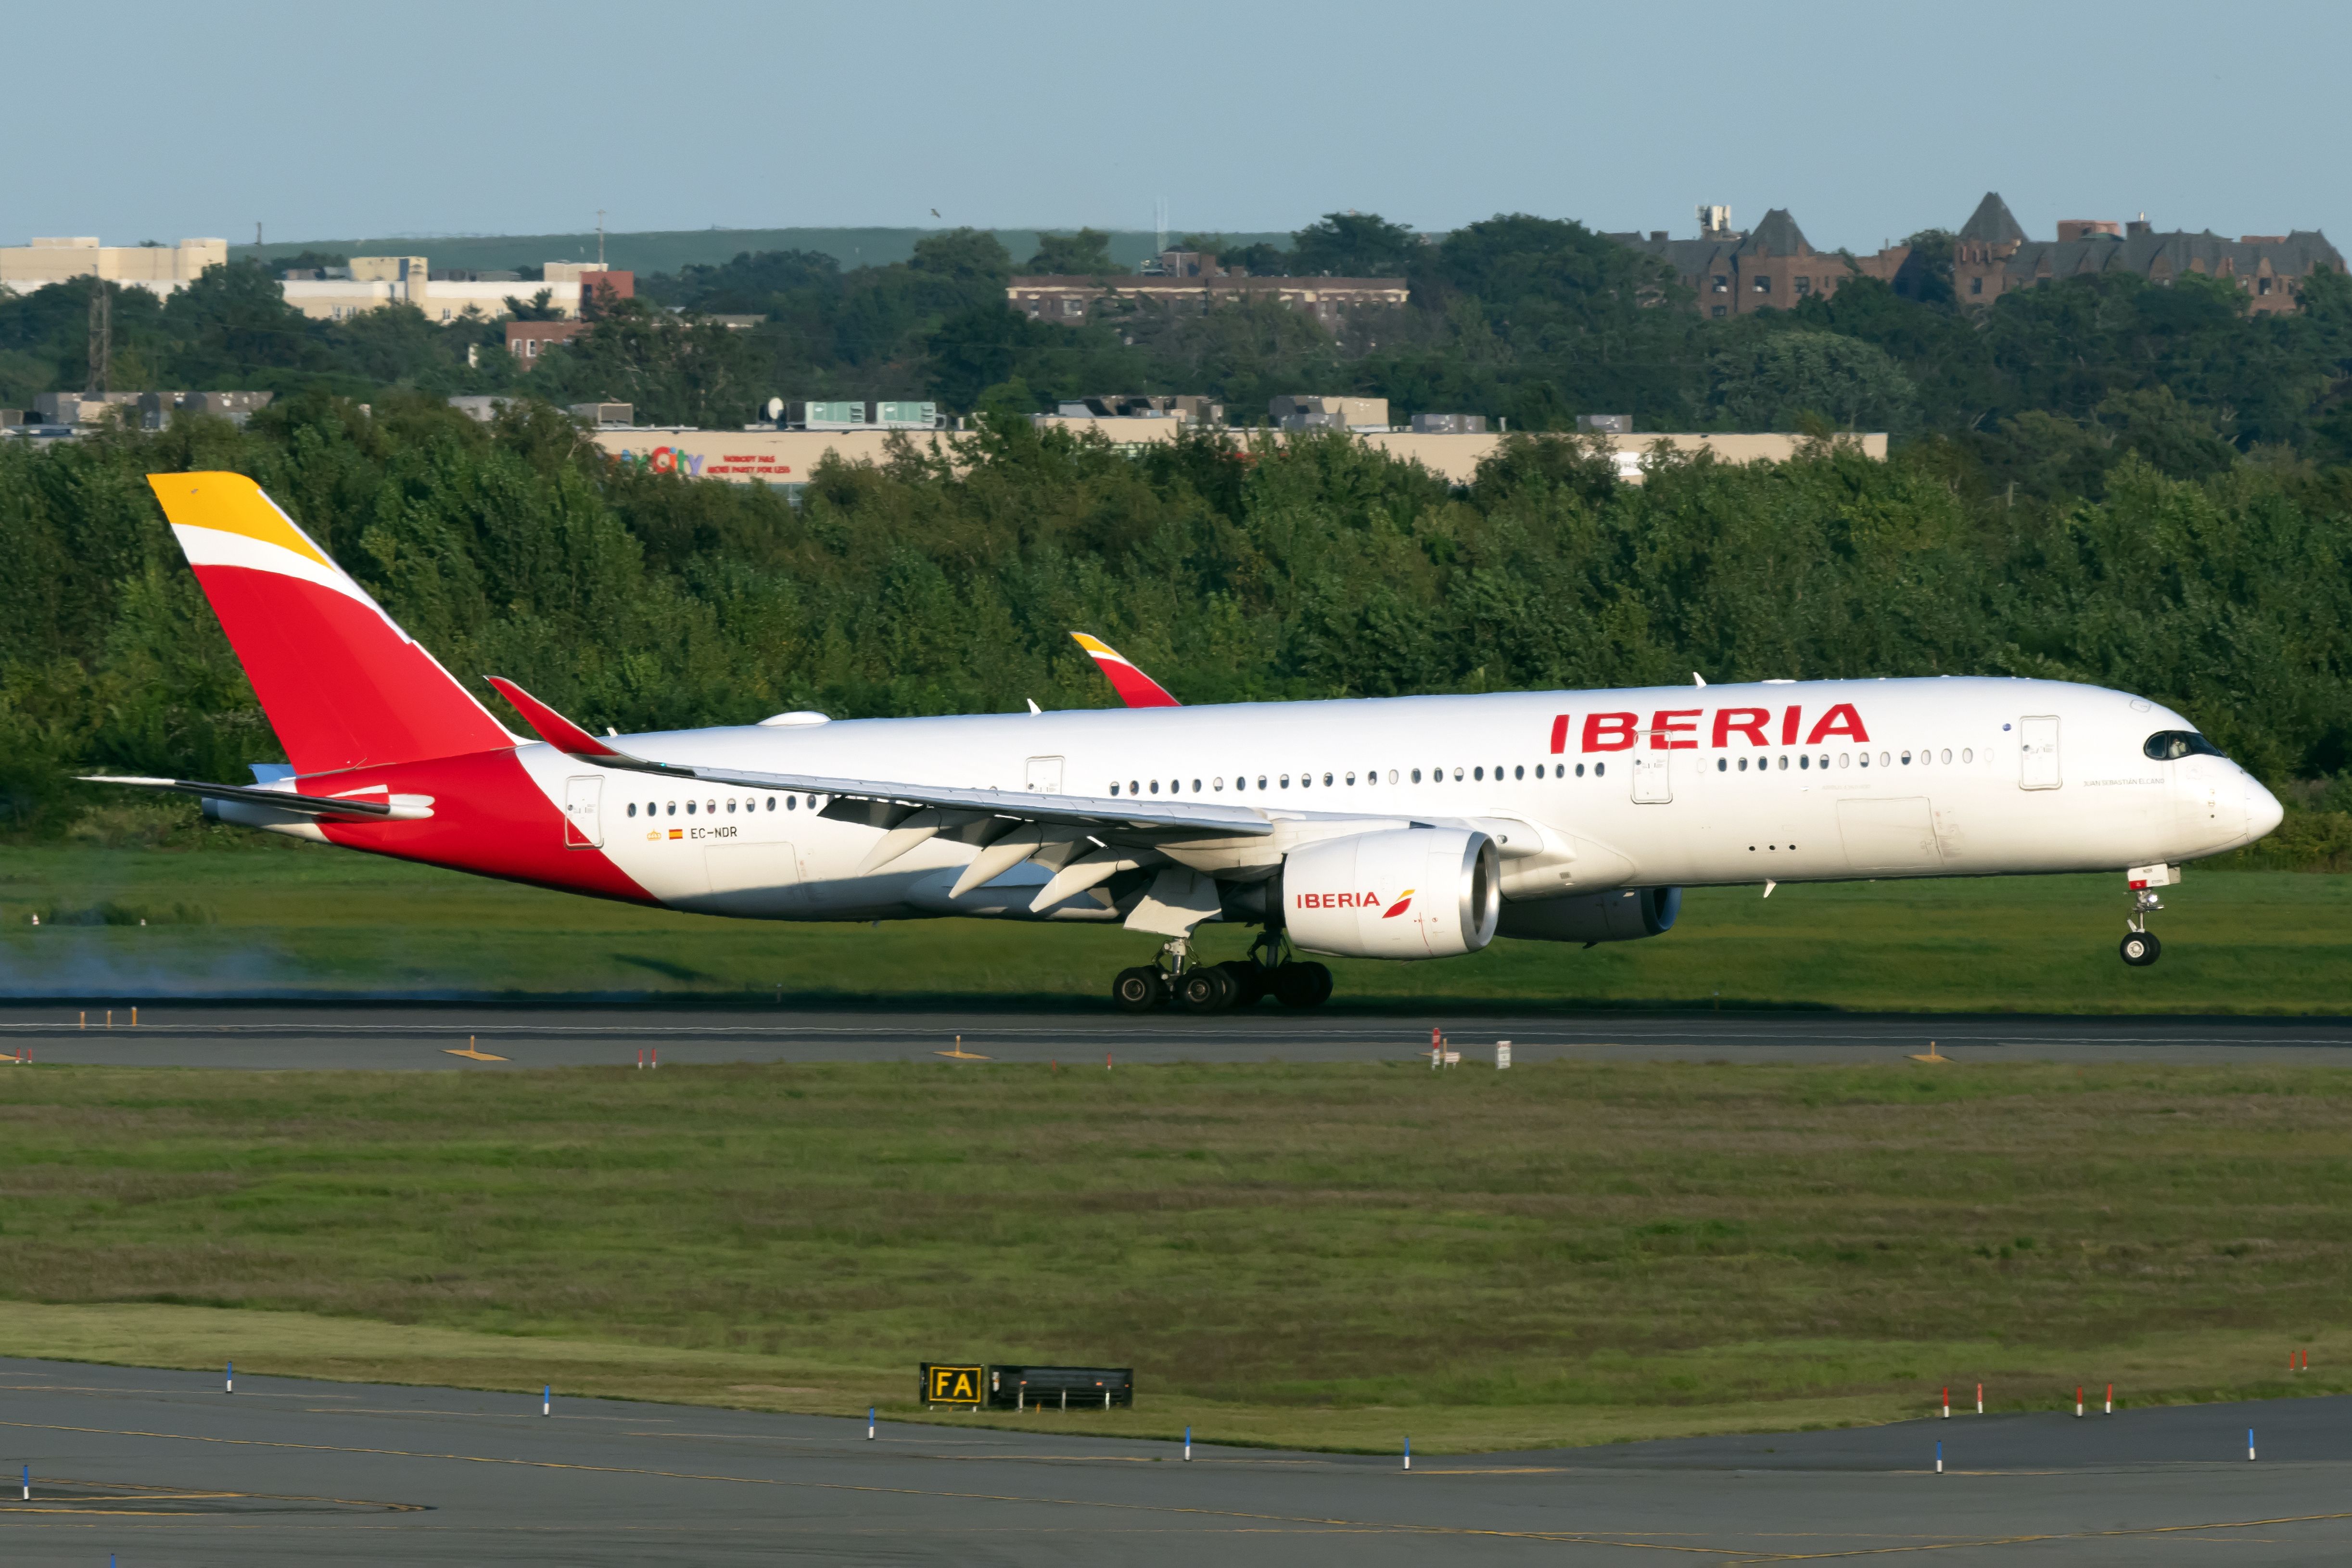 An Iberia Airbus A350-900 just after takeoff.